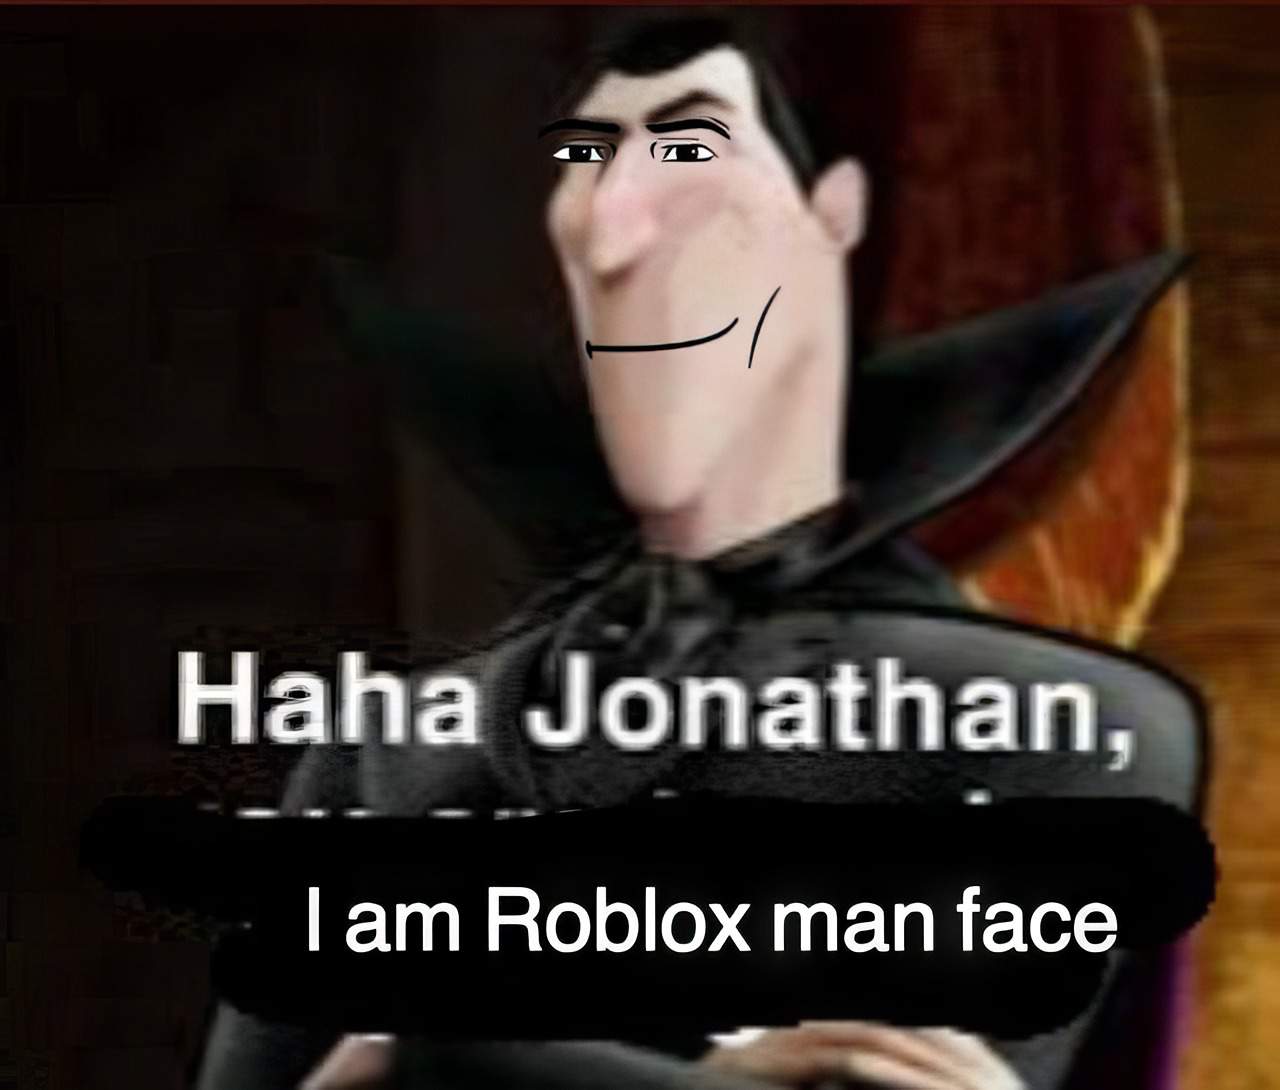 saw someone mention this in a comment section, roblox man face